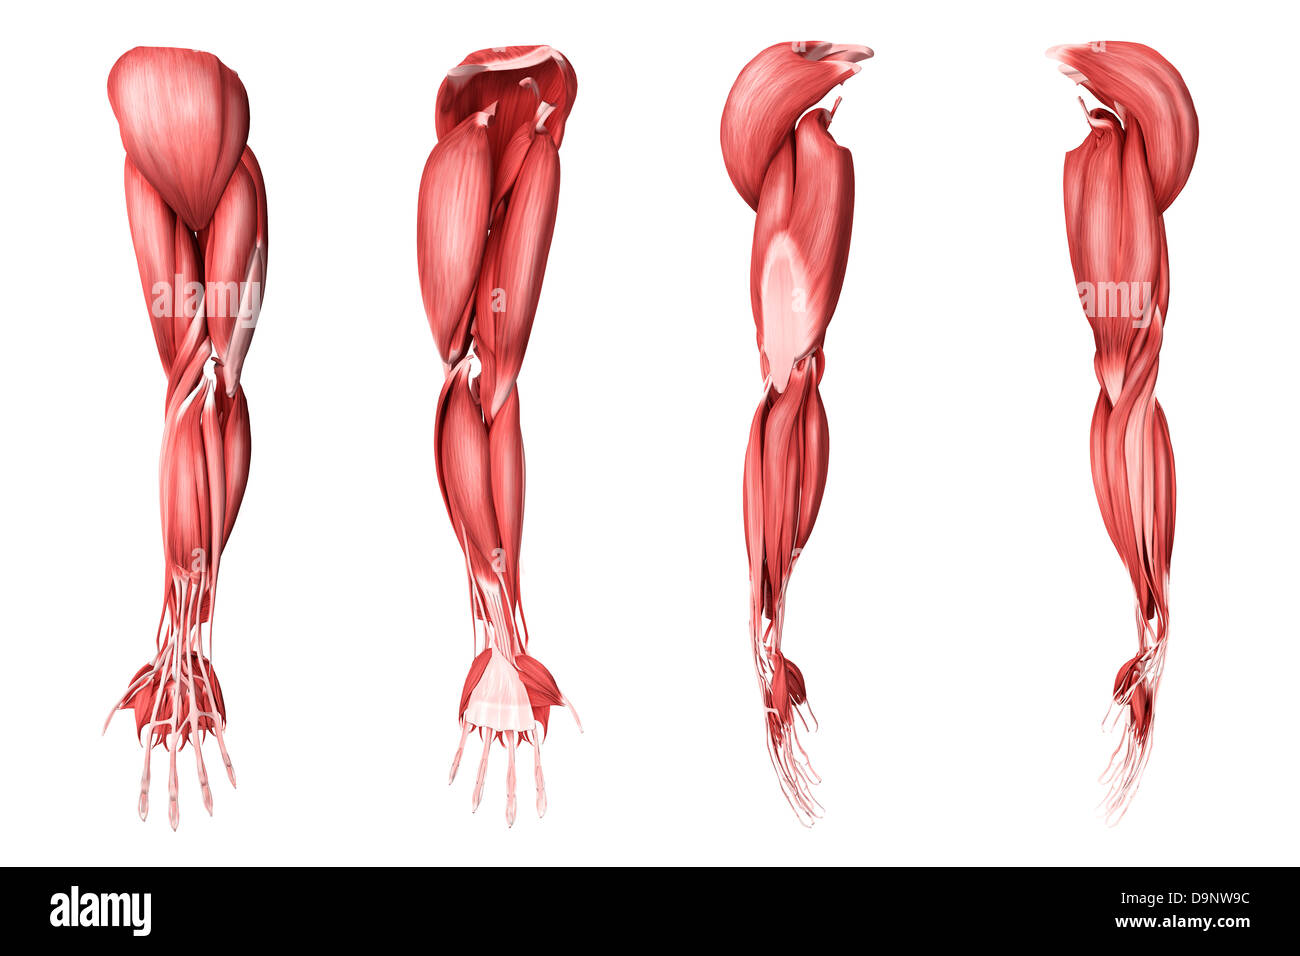 Medical illustration of human arm muscles, four side views. Stock Photo